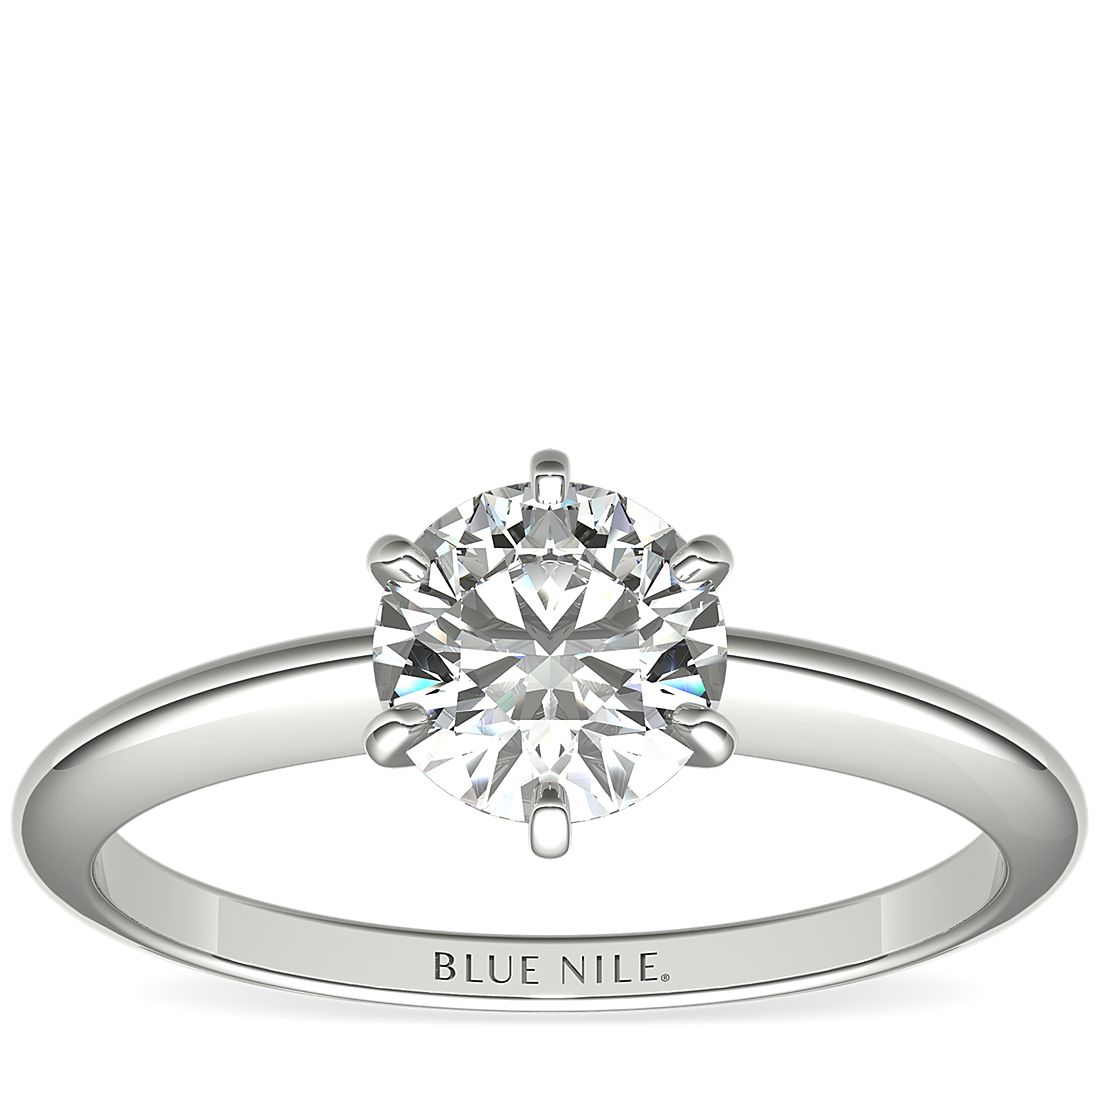 A six-claw solitaire engagement ring with a 1-carat round centre diamond.